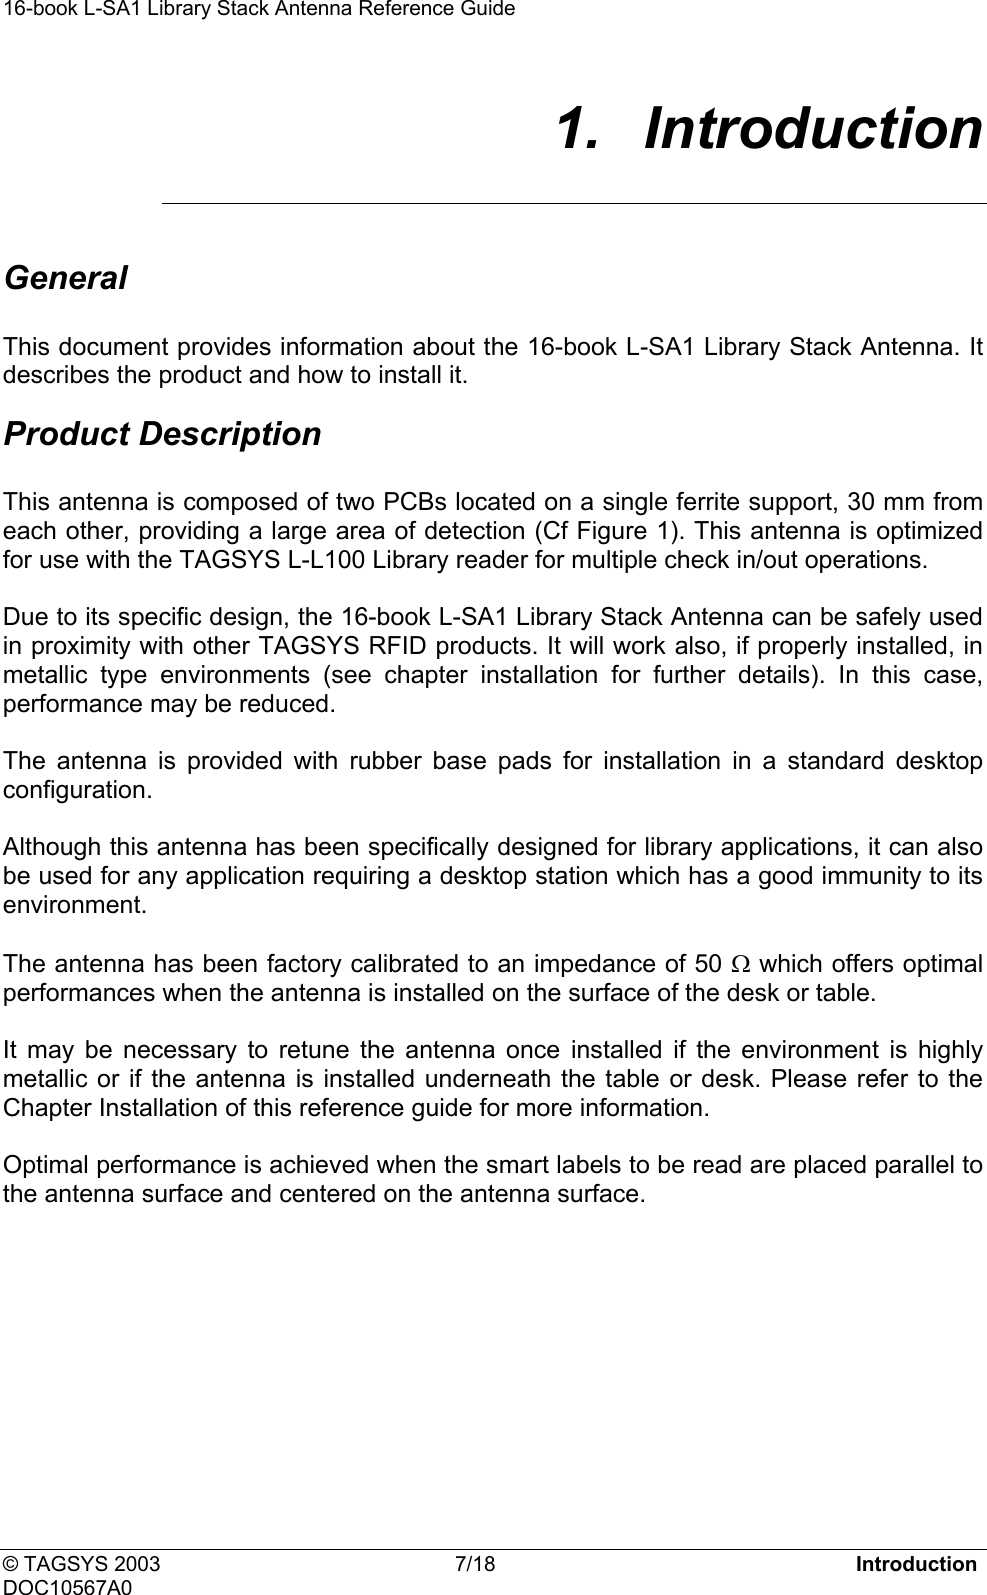 16-book L-SA1 Library Stack Antenna Reference Guide     1.  Introduction  General  This document provides information about the 16-book L-SA1 Library Stack Antenna. It describes the product and how to install it. Product Description  This antenna is composed of two PCBs located on a single ferrite support, 30 mm from each other, providing a large area of detection (Cf Figure 1). This antenna is optimized for use with the TAGSYS L-L100 Library reader for multiple check in/out operations.  Due to its specific design, the 16-book L-SA1 Library Stack Antenna can be safely used in proximity with other TAGSYS RFID products. It will work also, if properly installed, in metallic type environments (see chapter installation for further details). In this case, performance may be reduced.  The antenna is provided with rubber base pads for installation in a standard desktop configuration.  Although this antenna has been specifically designed for library applications, it can also be used for any application requiring a desktop station which has a good immunity to its environment.   The antenna has been factory calibrated to an impedance of 50 Ω which offers optimal performances when the antenna is installed on the surface of the desk or table.  It may be necessary to retune the antenna once installed if the environment is highly metallic or if the antenna is installed underneath the table or desk. Please refer to the Chapter Installation of this reference guide for more information.   Optimal performance is achieved when the smart labels to be read are placed parallel to the antenna surface and centered on the antenna surface.   © TAGSYS 2003  7/18  Introduction DOC10567A0 